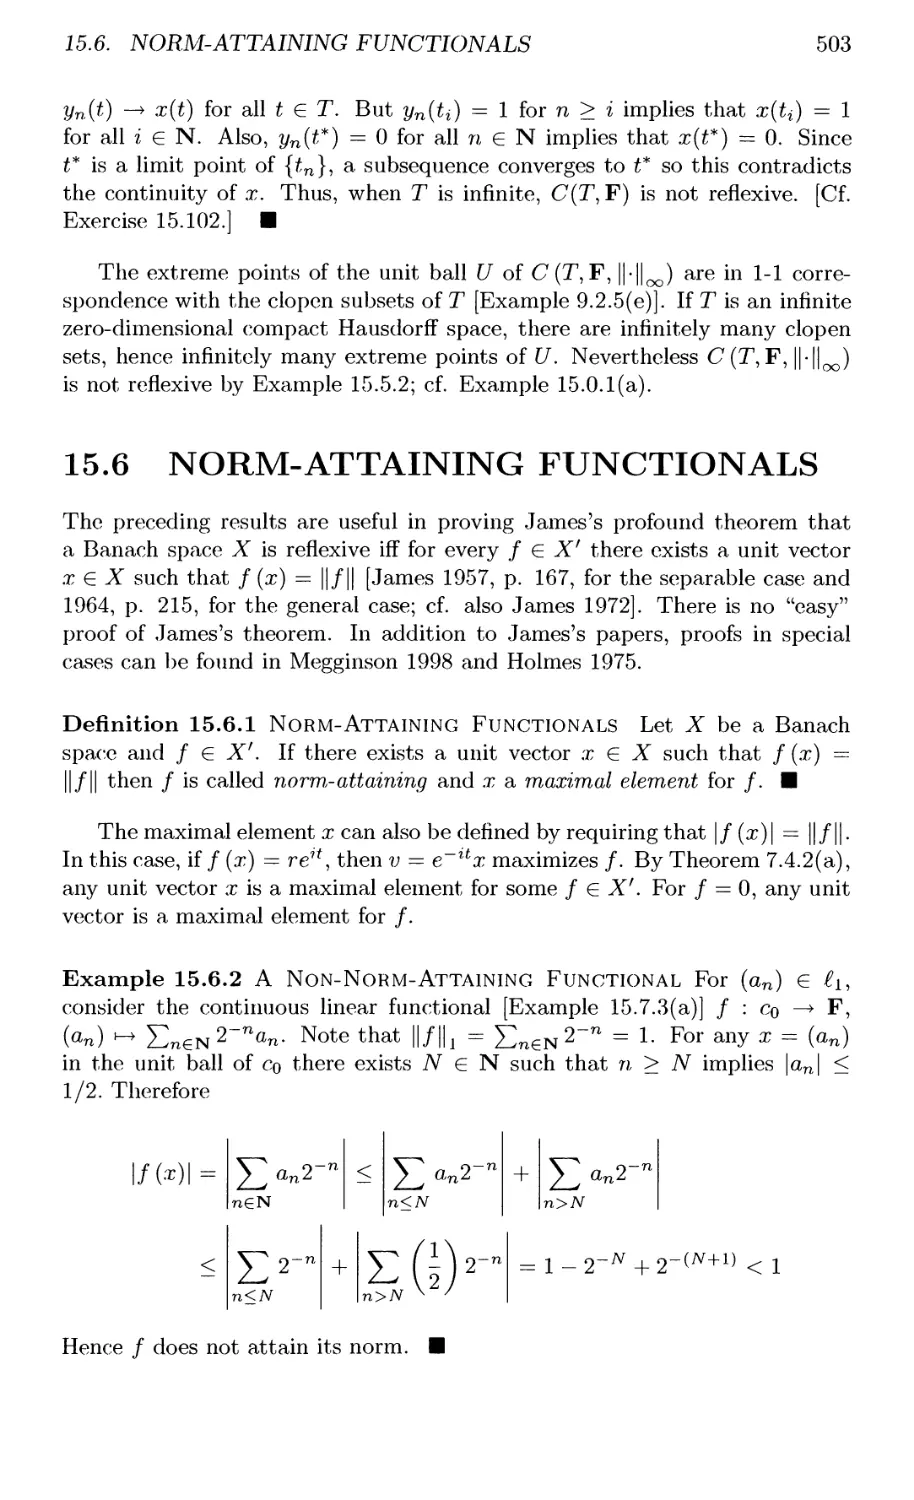 15.6 NORM-ATTAINING FUNCTIONALS